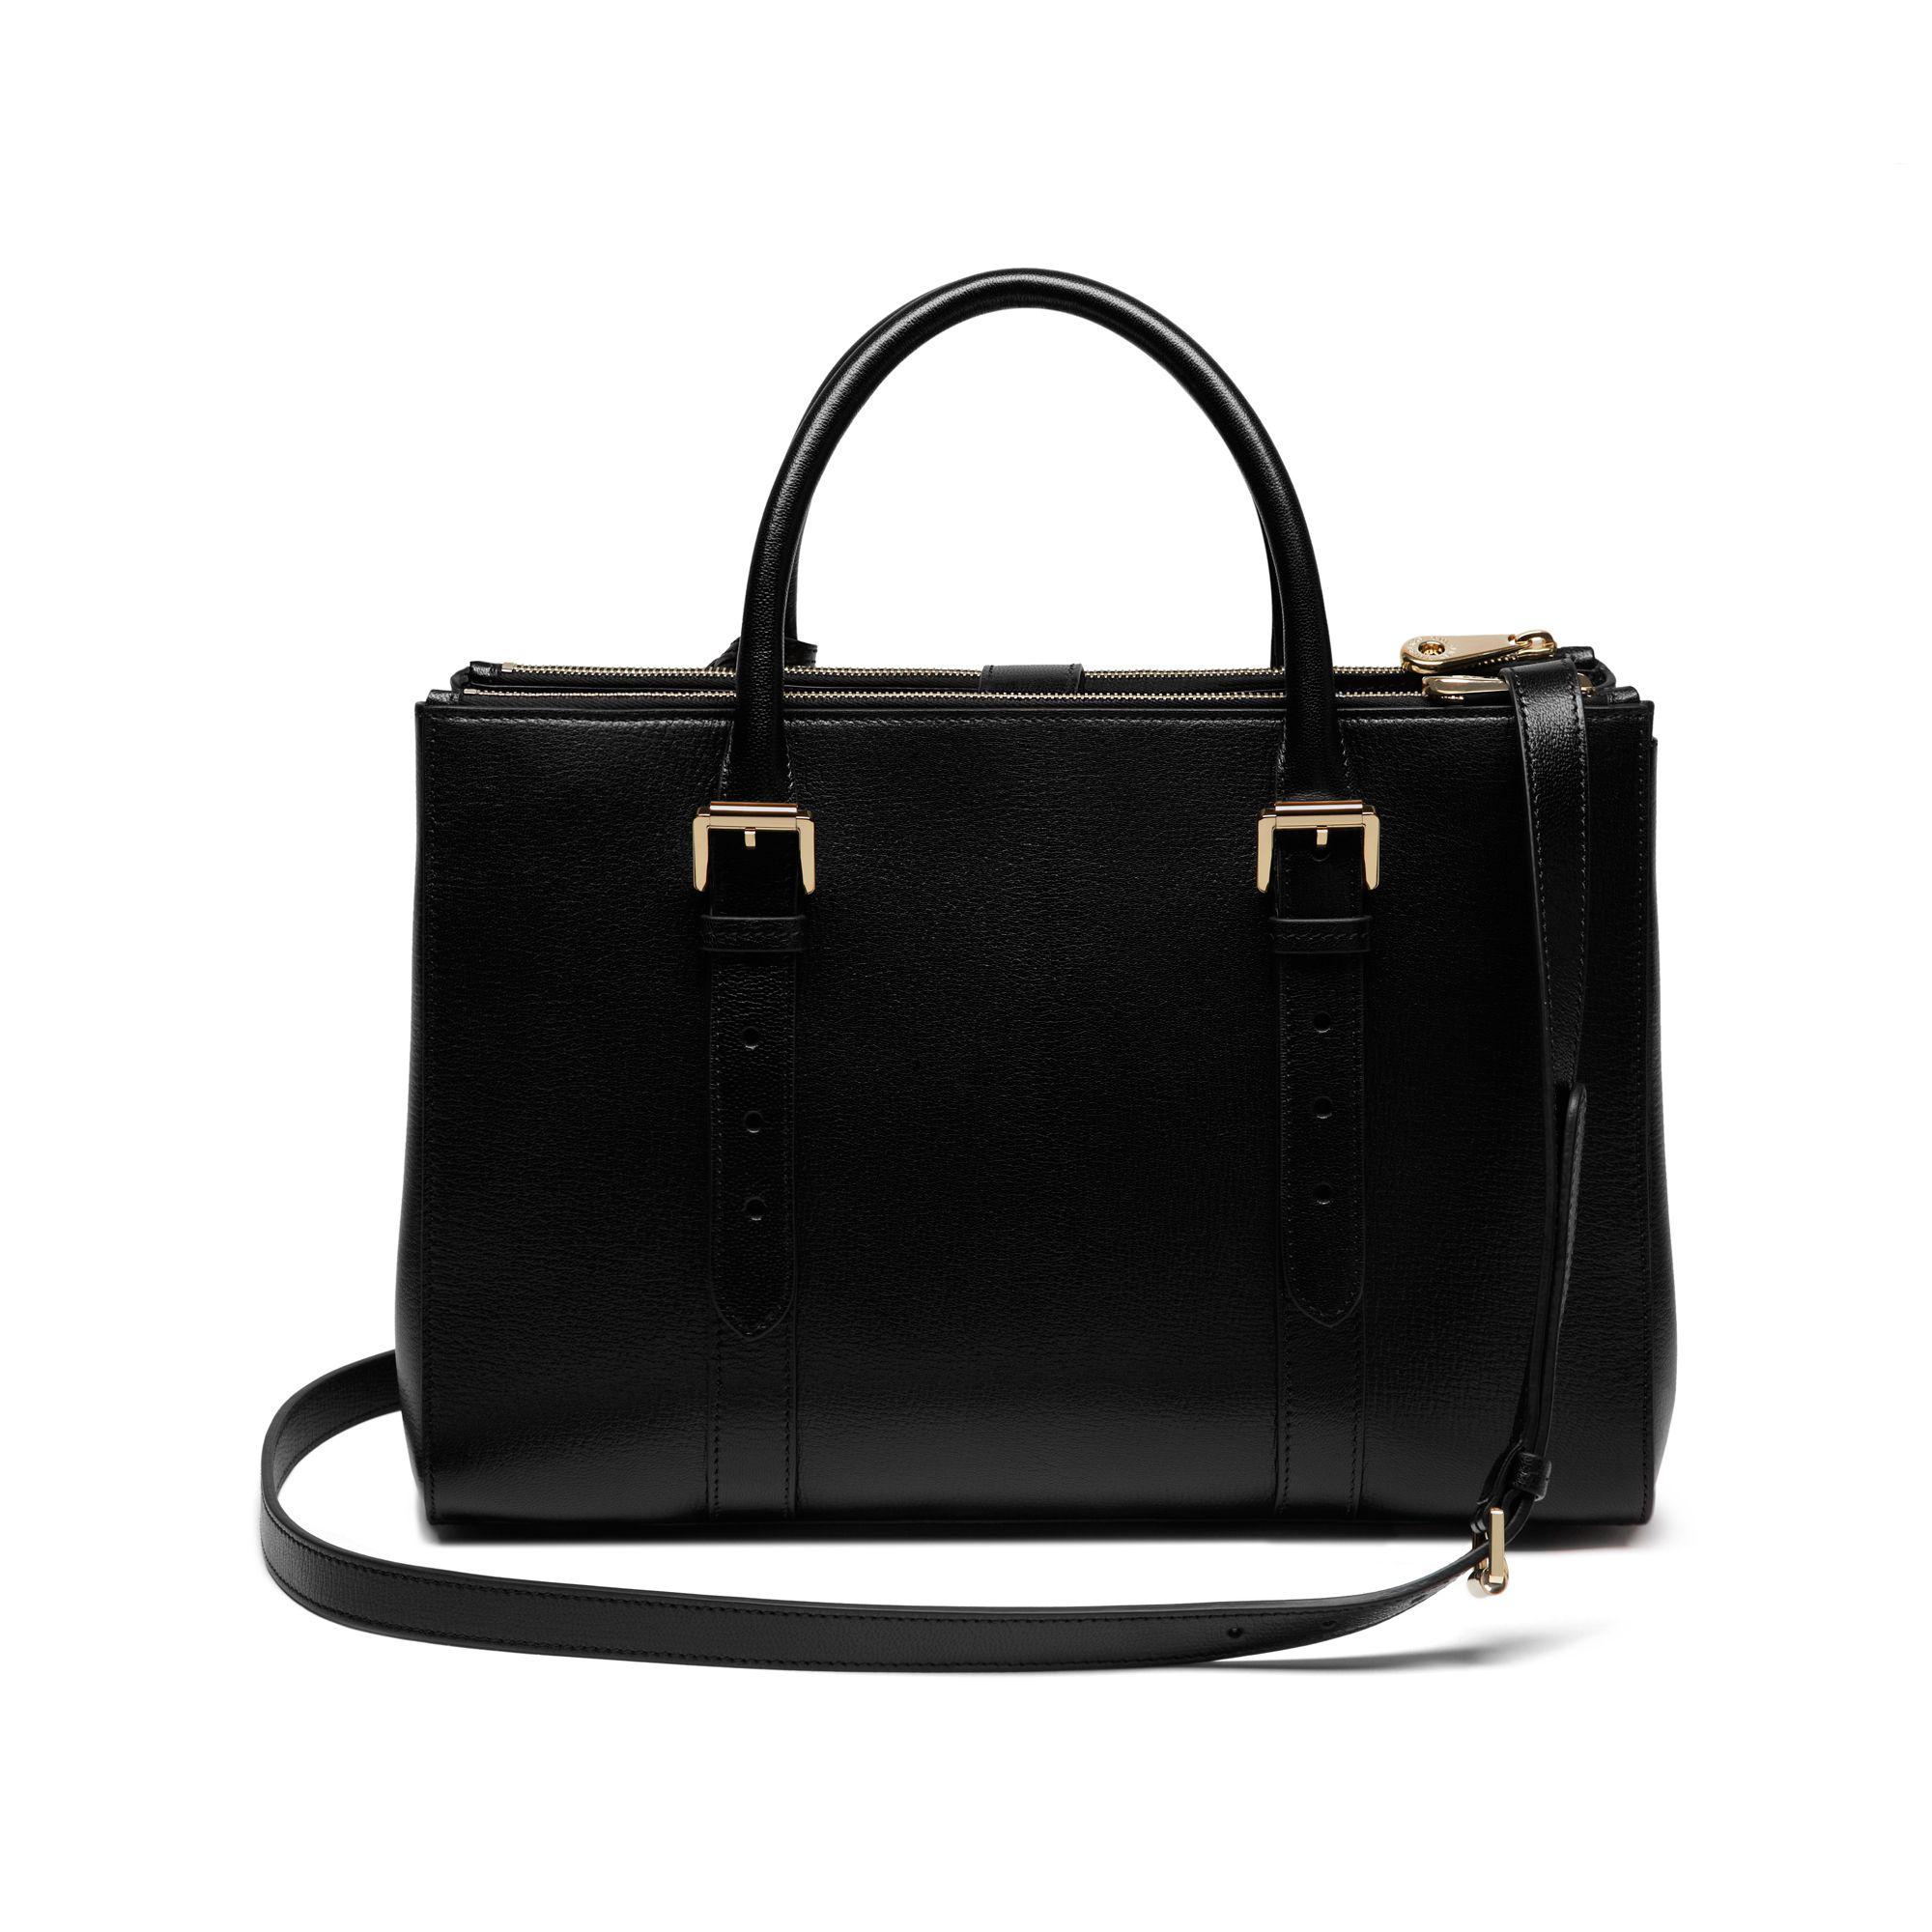 Mulberry Bayswater Double Zip Tote Bag in Black - Lyst